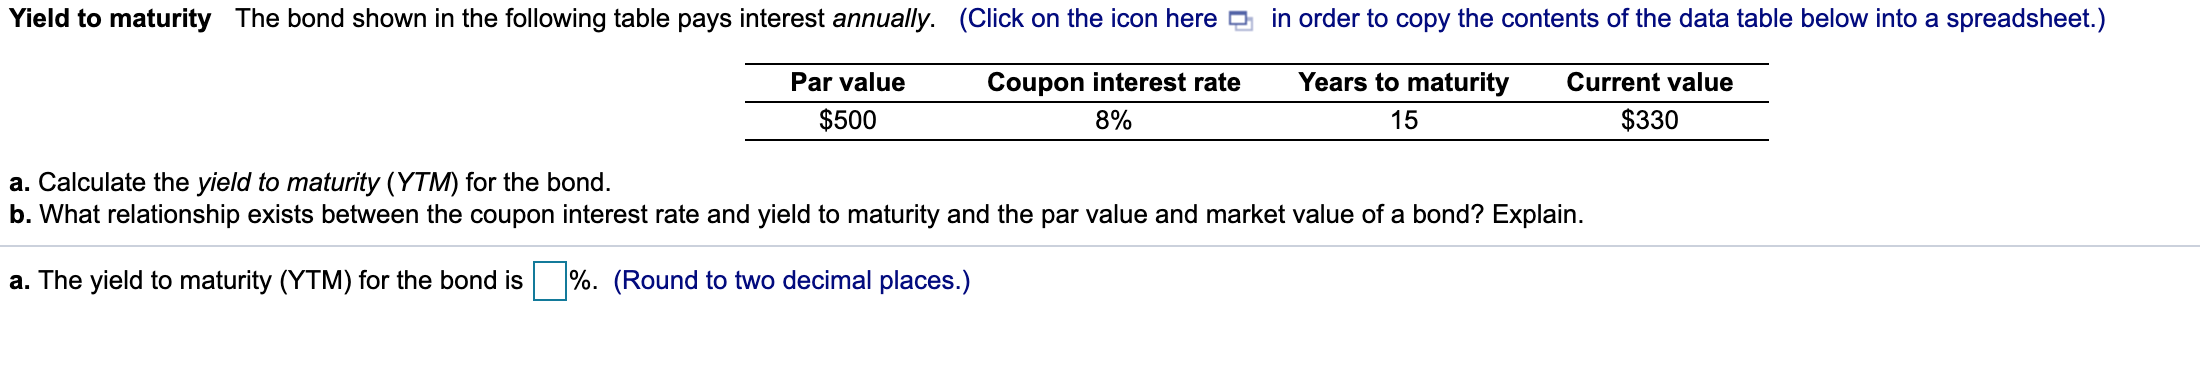 Yield to maturity The bond shown in the following table pays interest annually. (Click on the icon here e in order to copy th